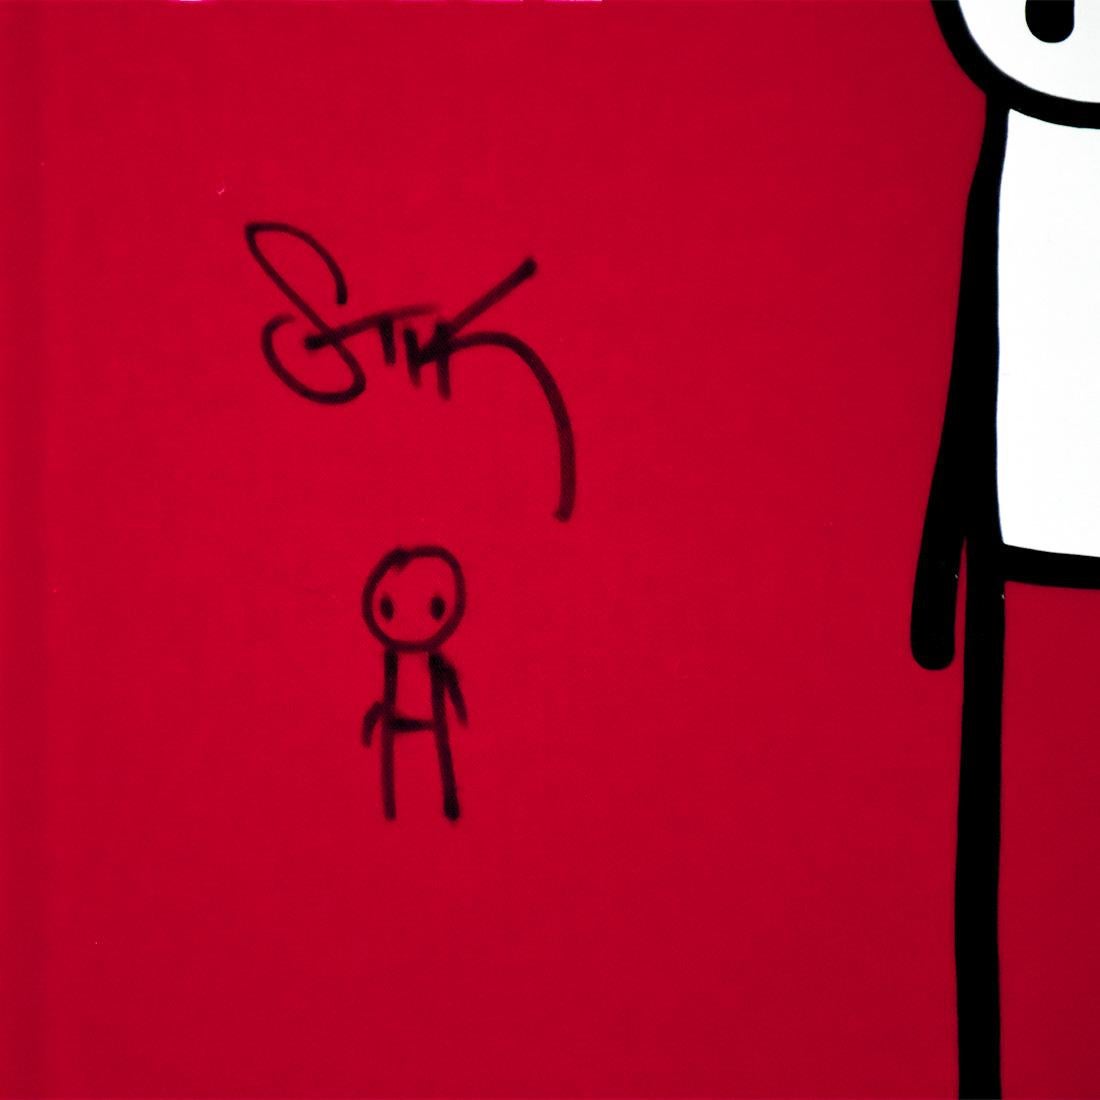 Amazing cover on Stik’s self titled book.
Hand signed and hand drawn with very cool figure on cover by Stik in black ink.
Perfect for framing.
Book is red with fabric cover.
224 pages printed in colors.
No poster.

Certificate of Authenticity issued